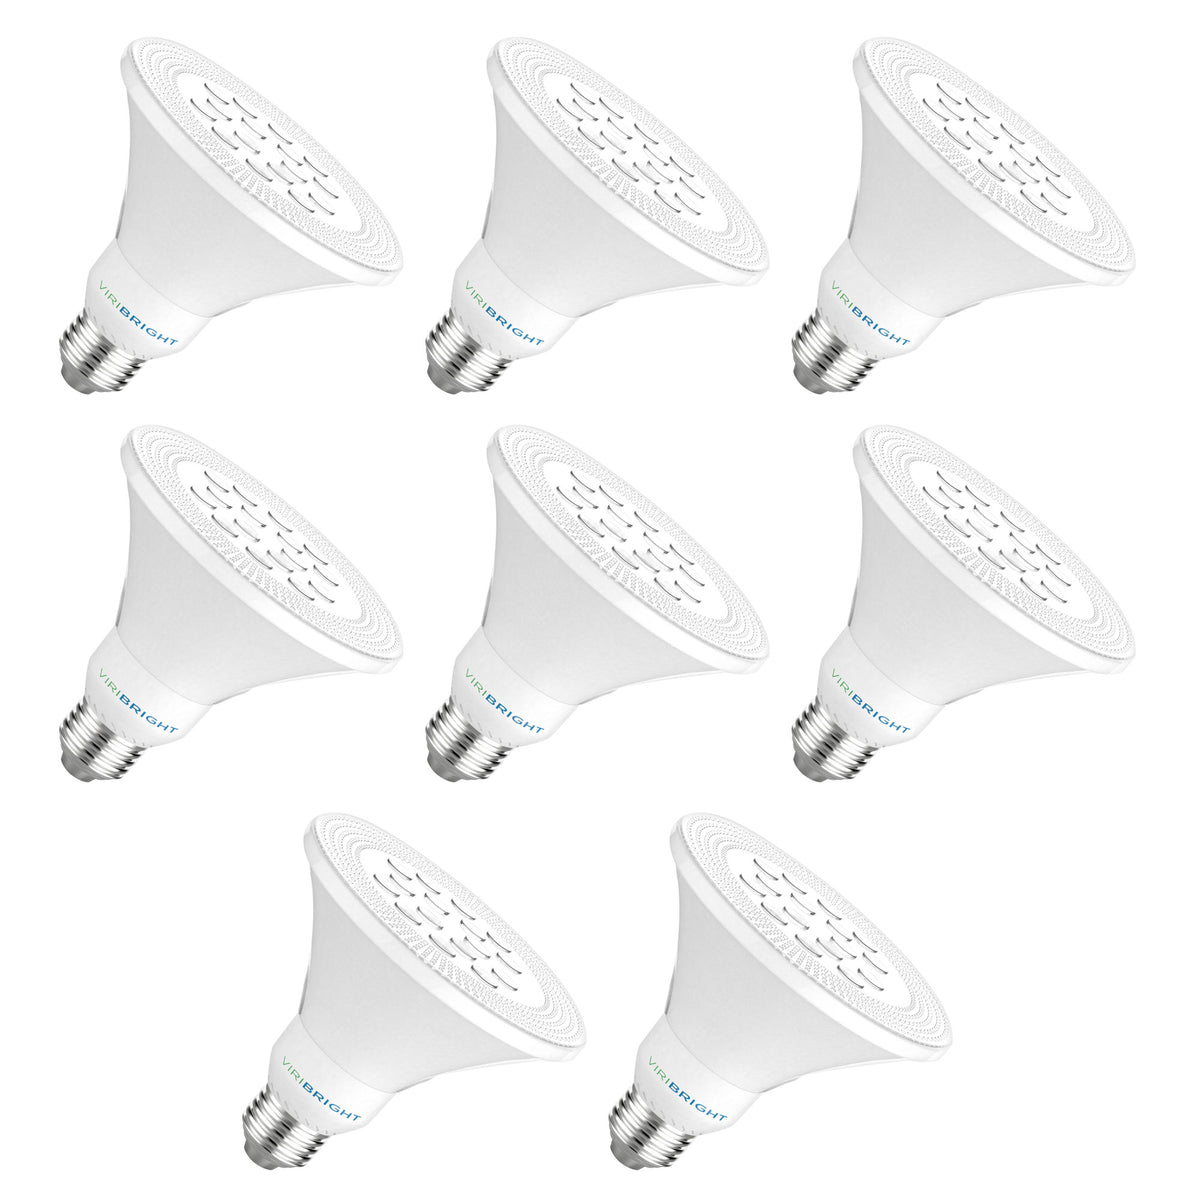 Picture of Viribright 754608-HD8 800 Lumens 75W Equivalent PAR30 Dimmable Short Neck Indoor LED Flood Light Bulb, Cool White - Pack of 8